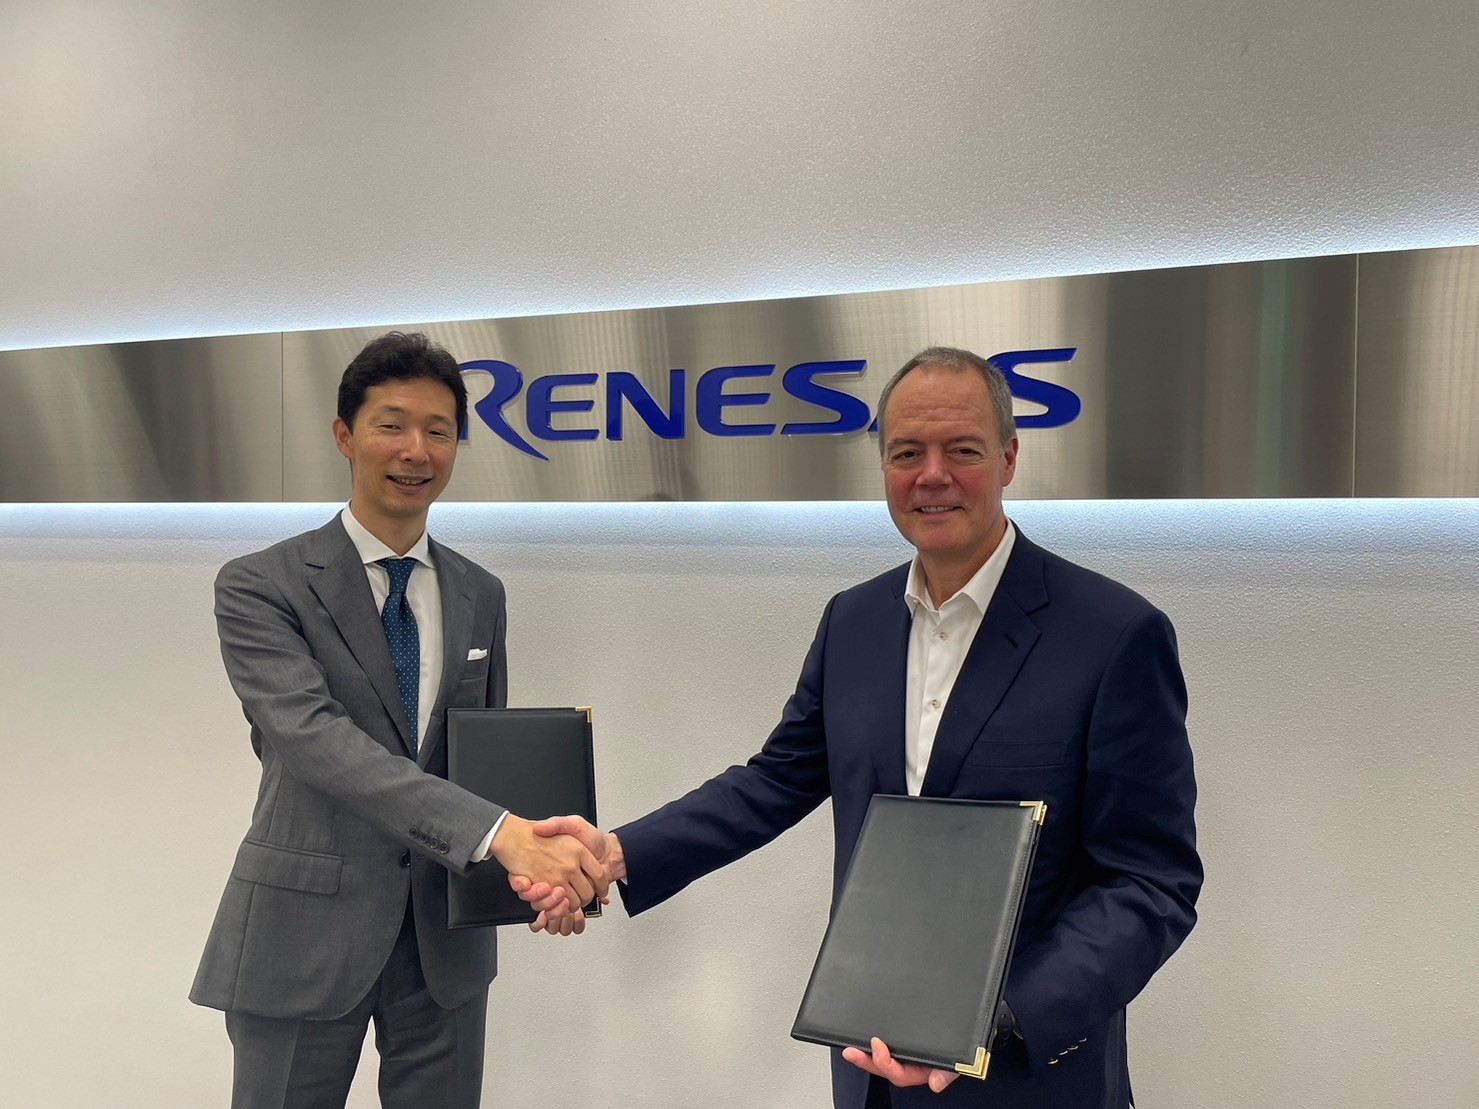 Renesas and Wolfspeed Sign 10 Year Silicon Carbide Wafer Supply Agreement